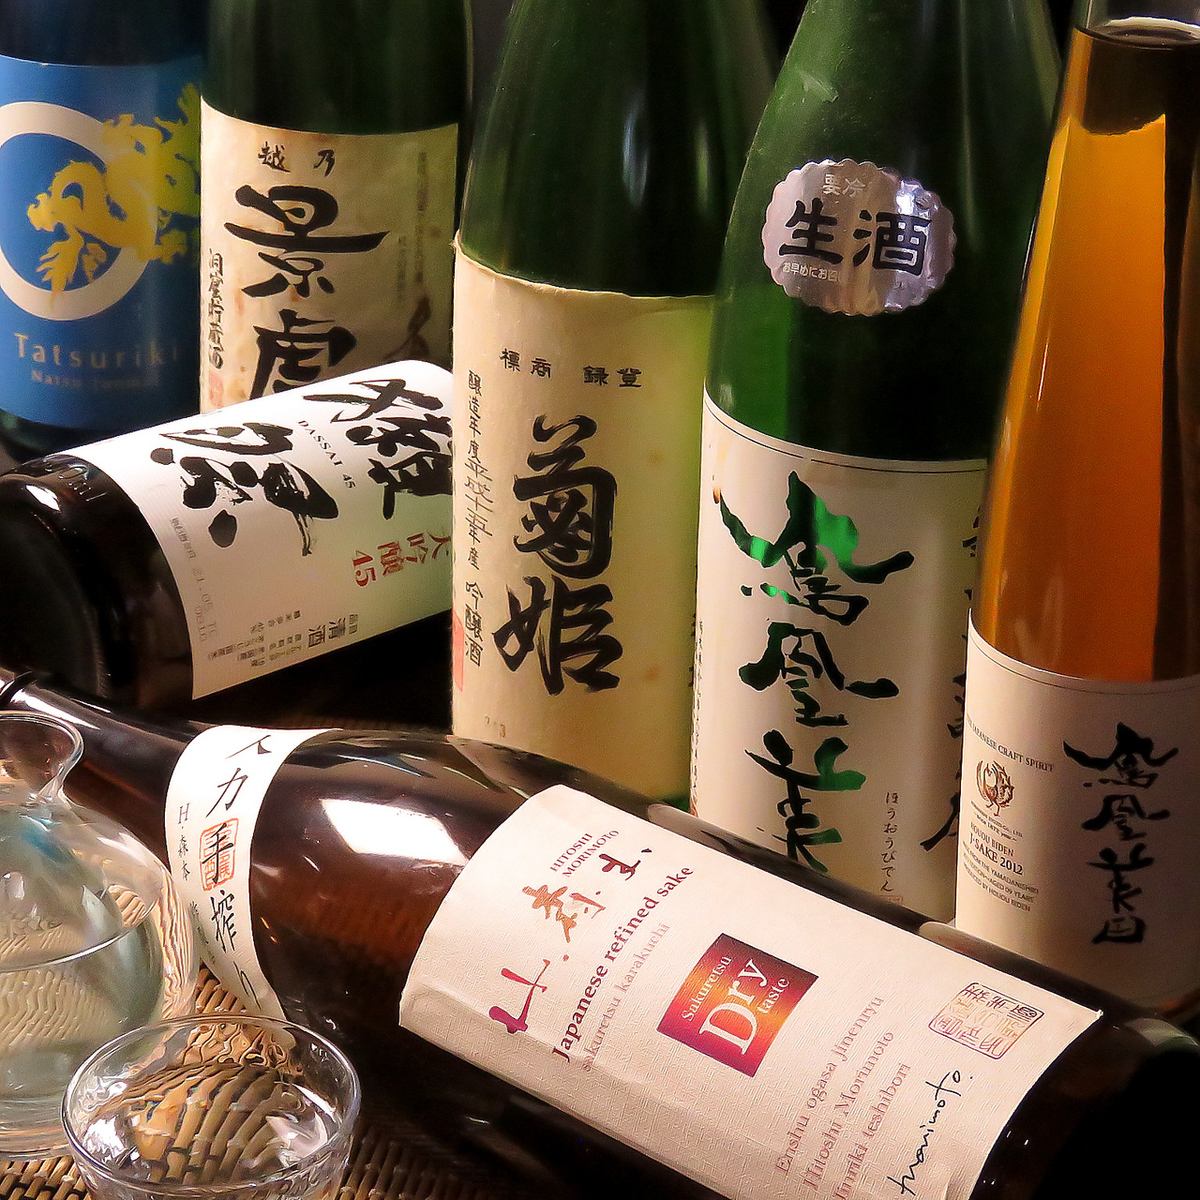 Shochu and sake carefully selected by the owner!